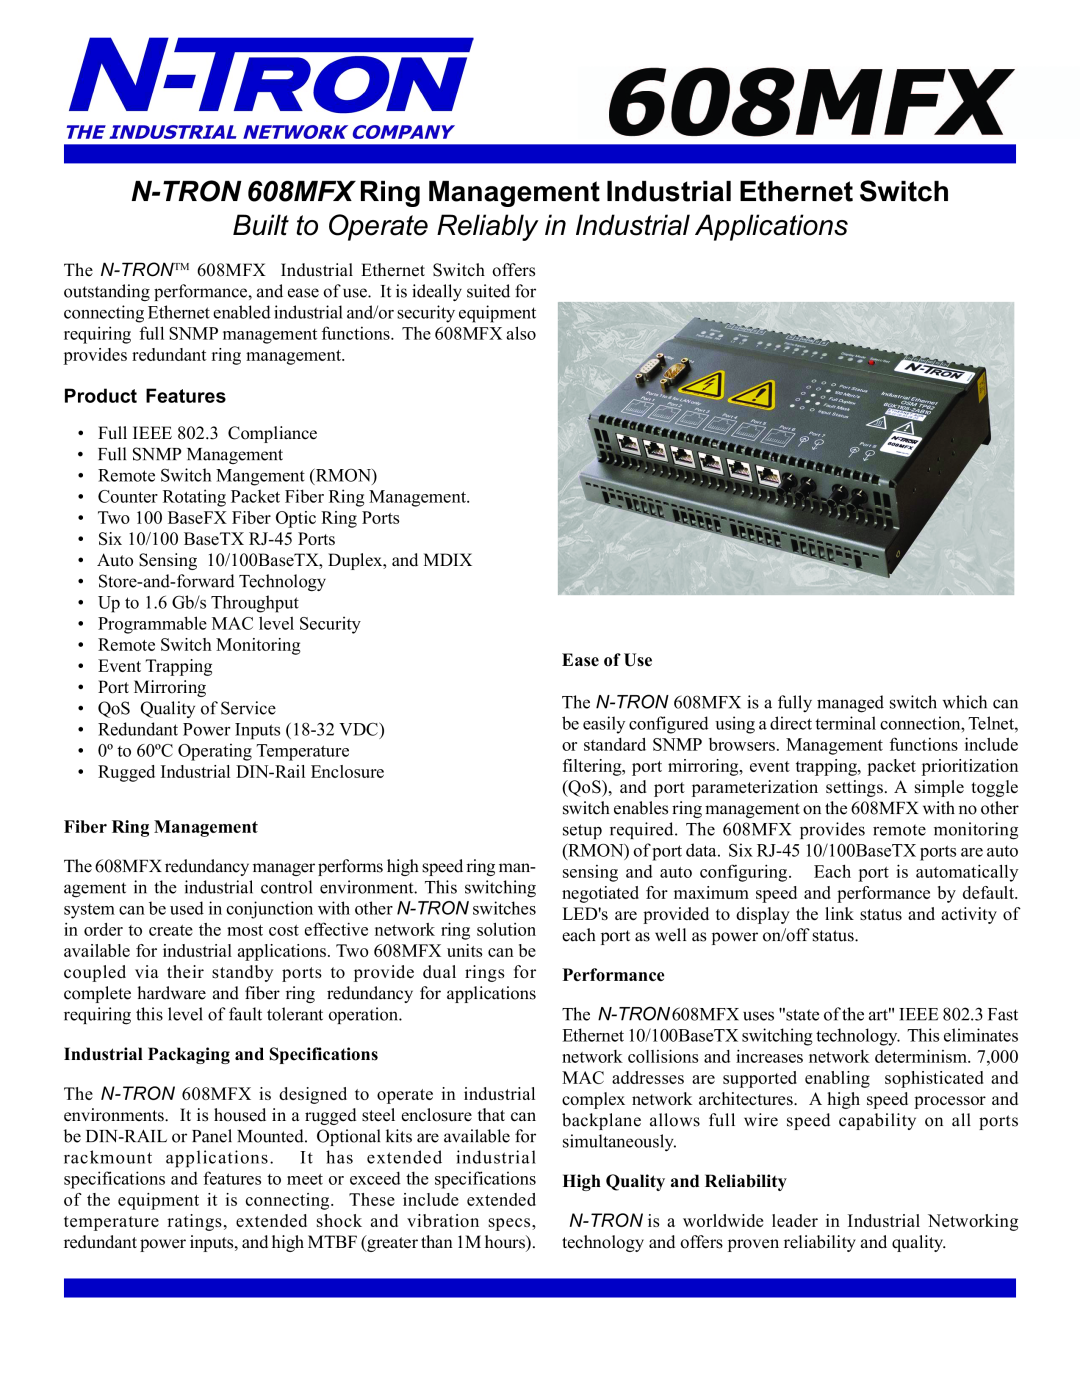 N-Tron specifications N-TRON 608MFX Ring Management Industrial Ethernet Switch, Product Features, Fiber Ring Management 